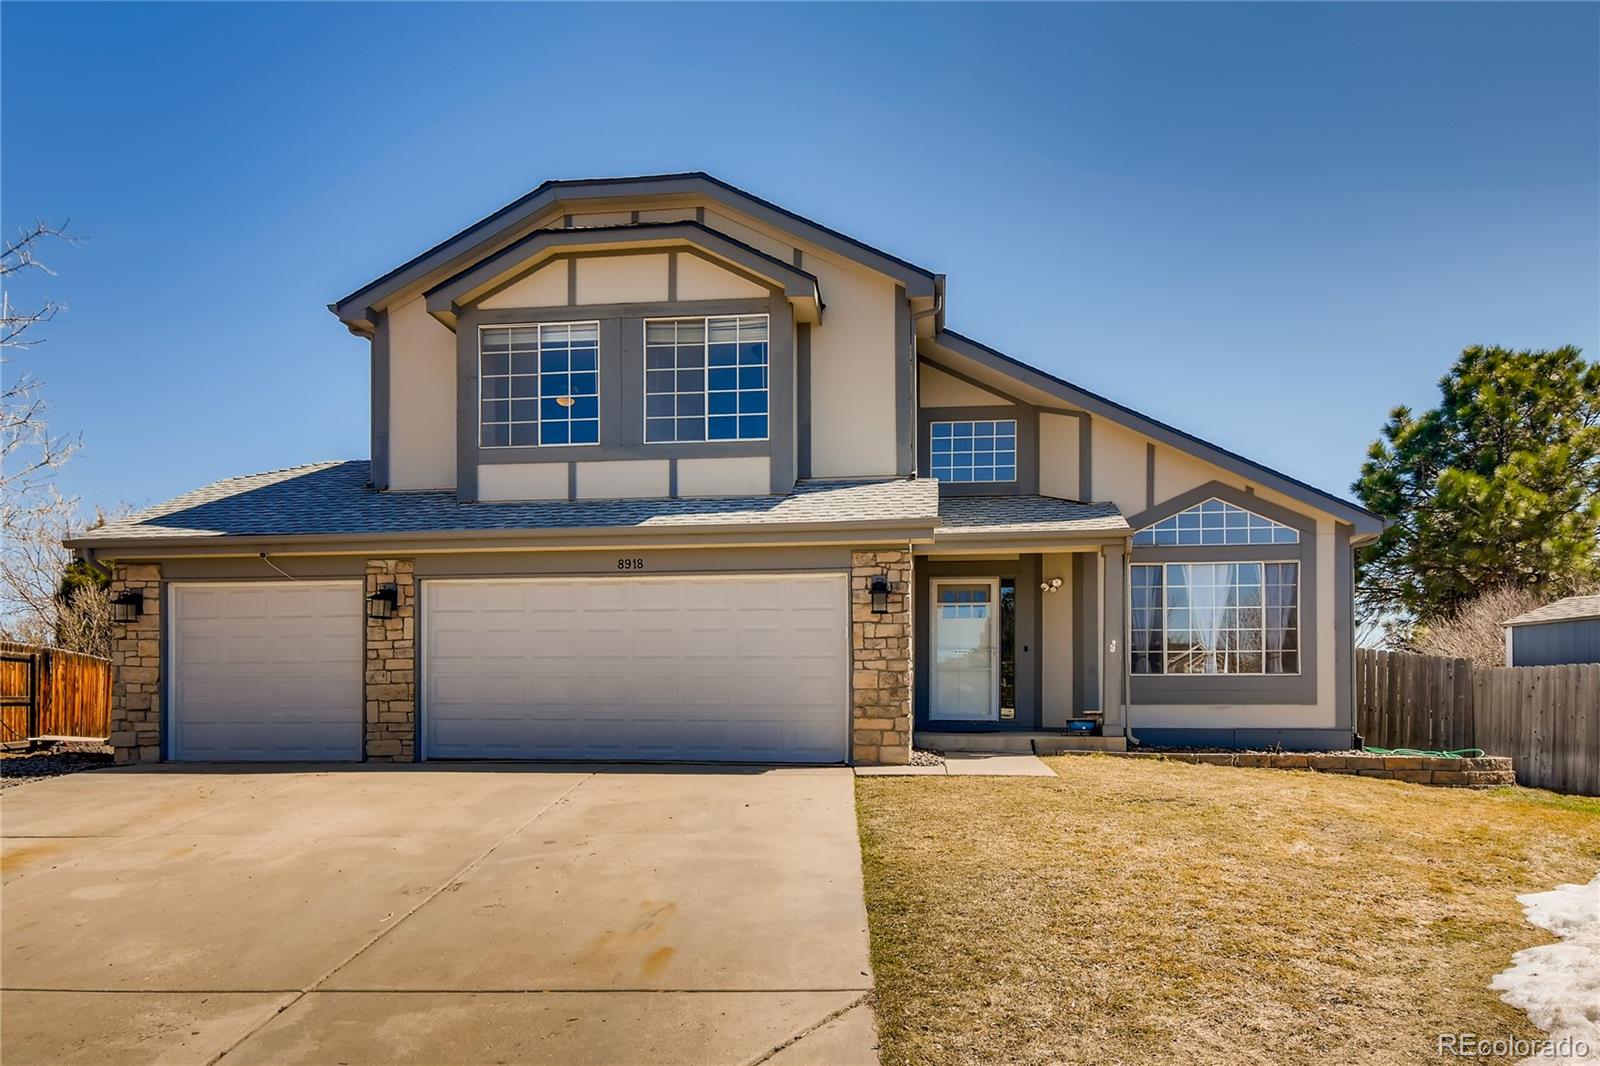 8918 101st, Westminster, CO